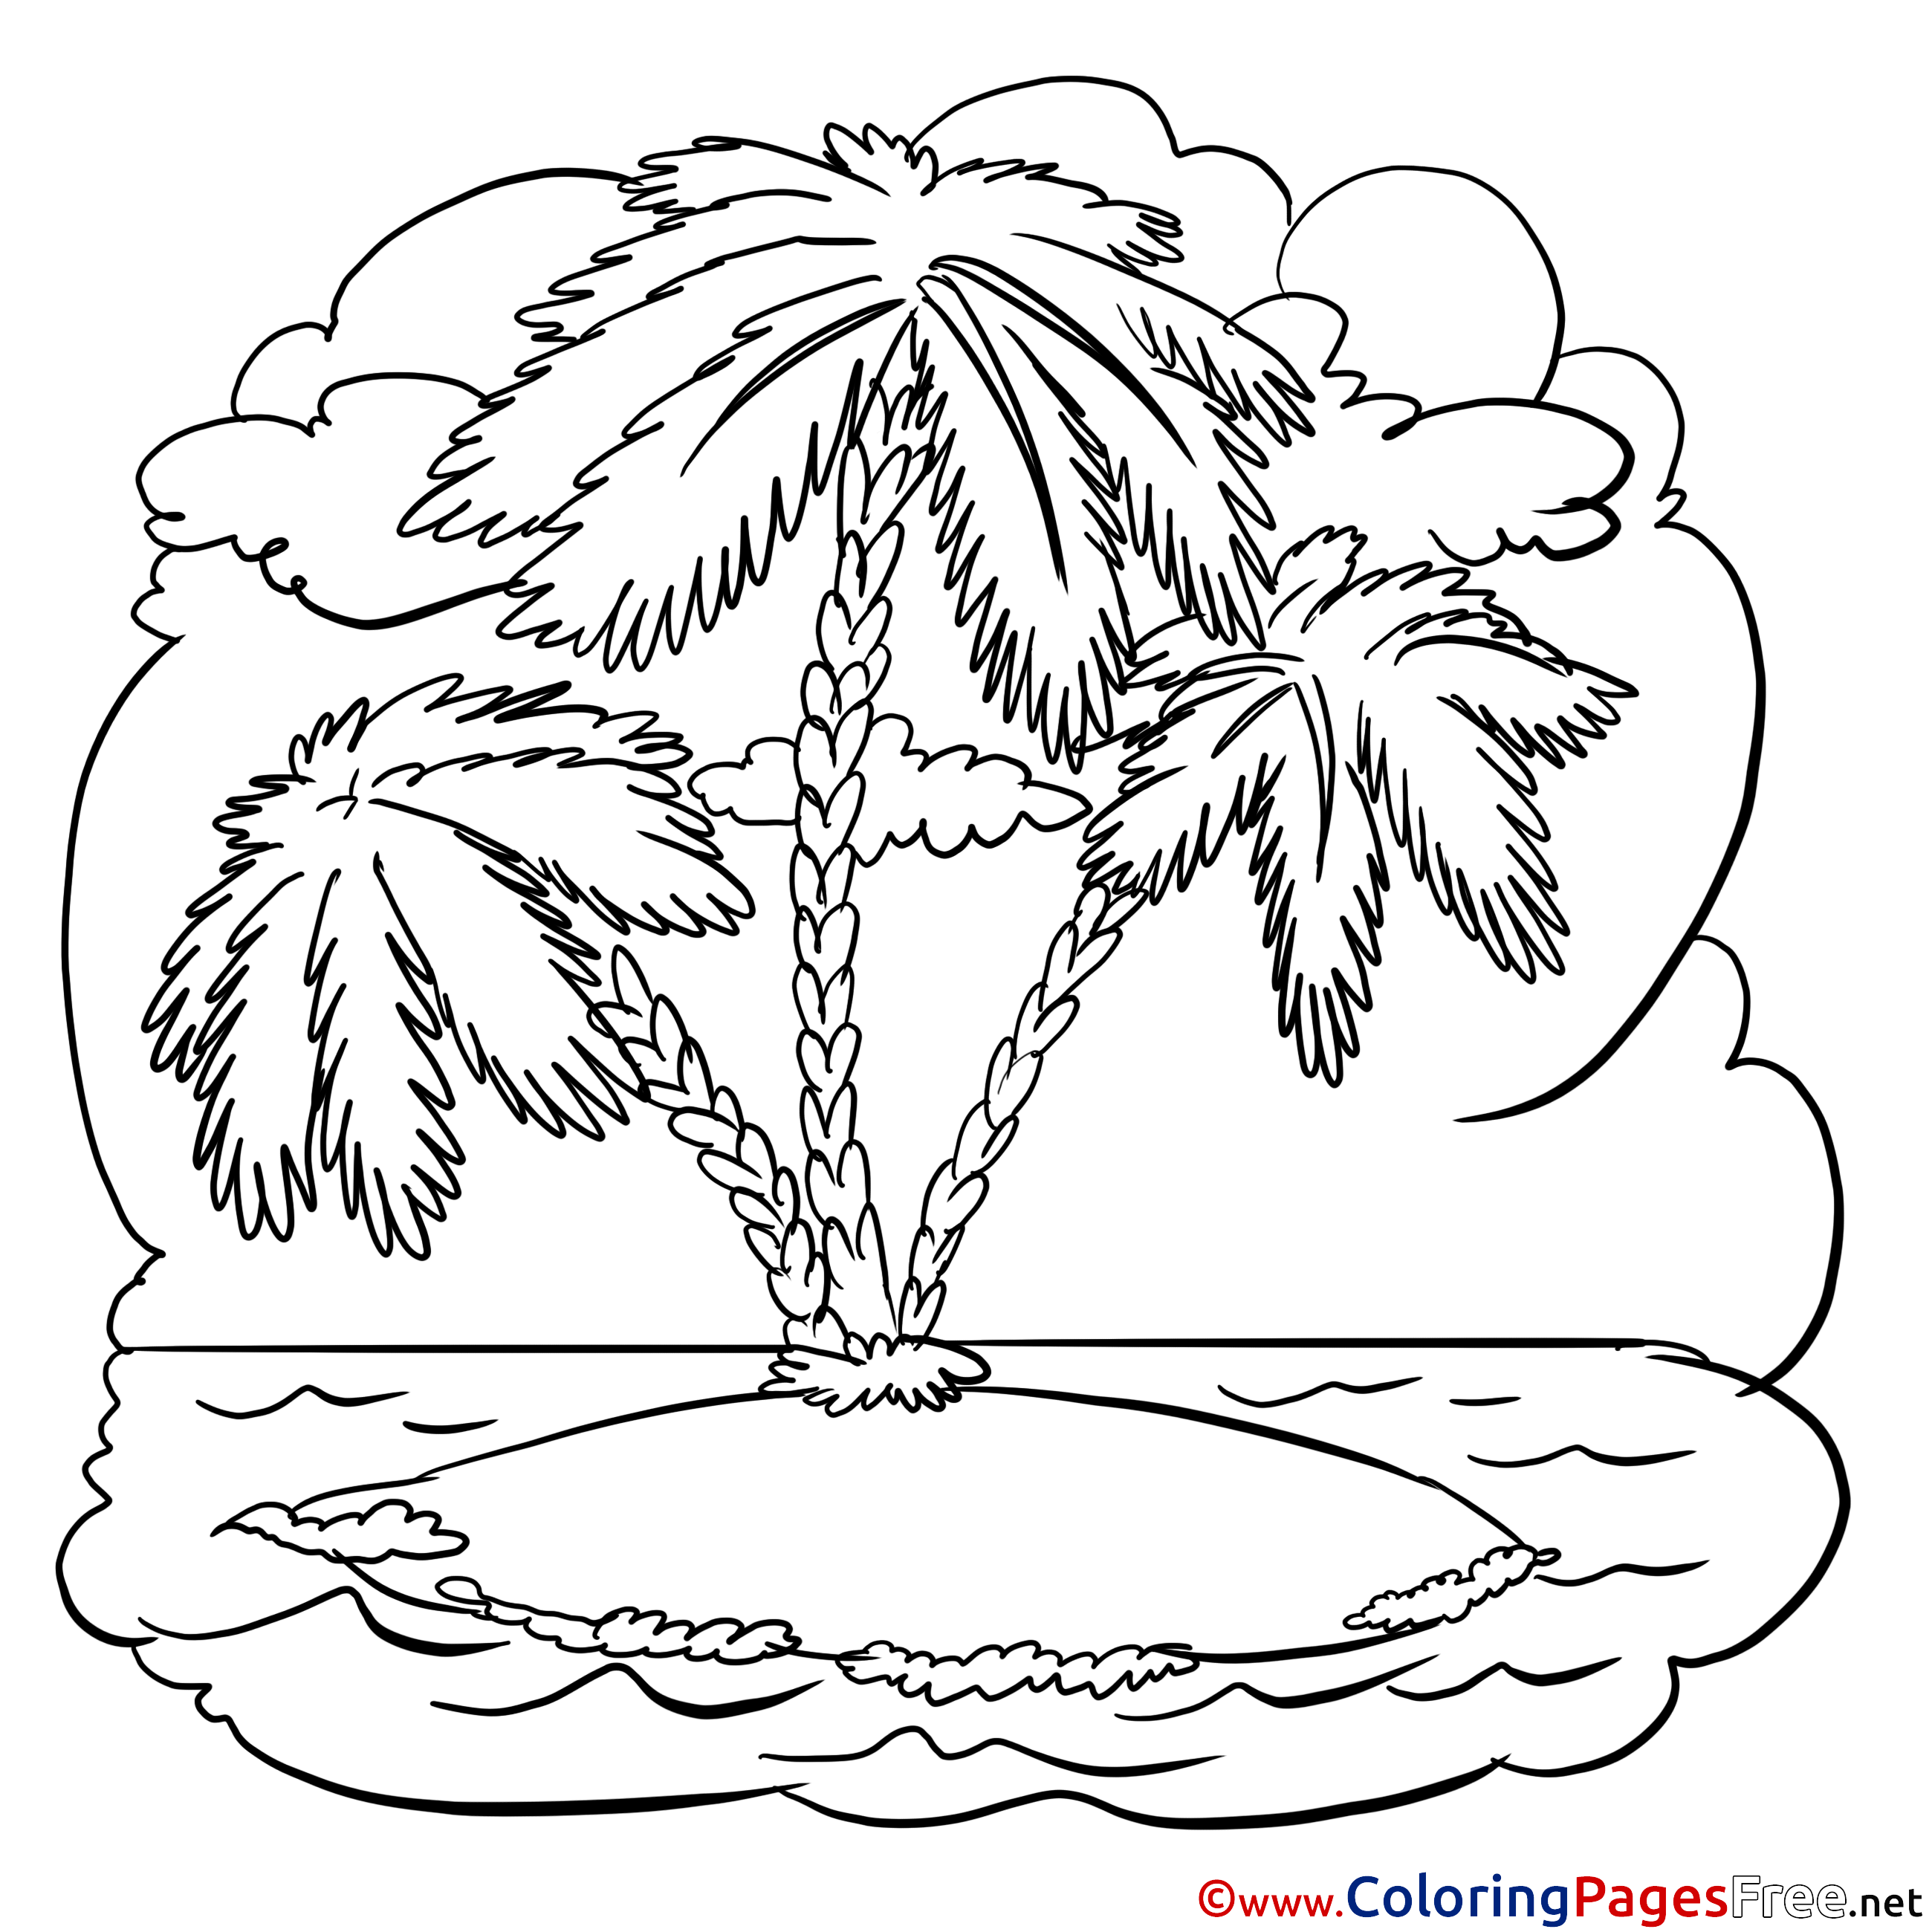 Simple Island Coloring Page 